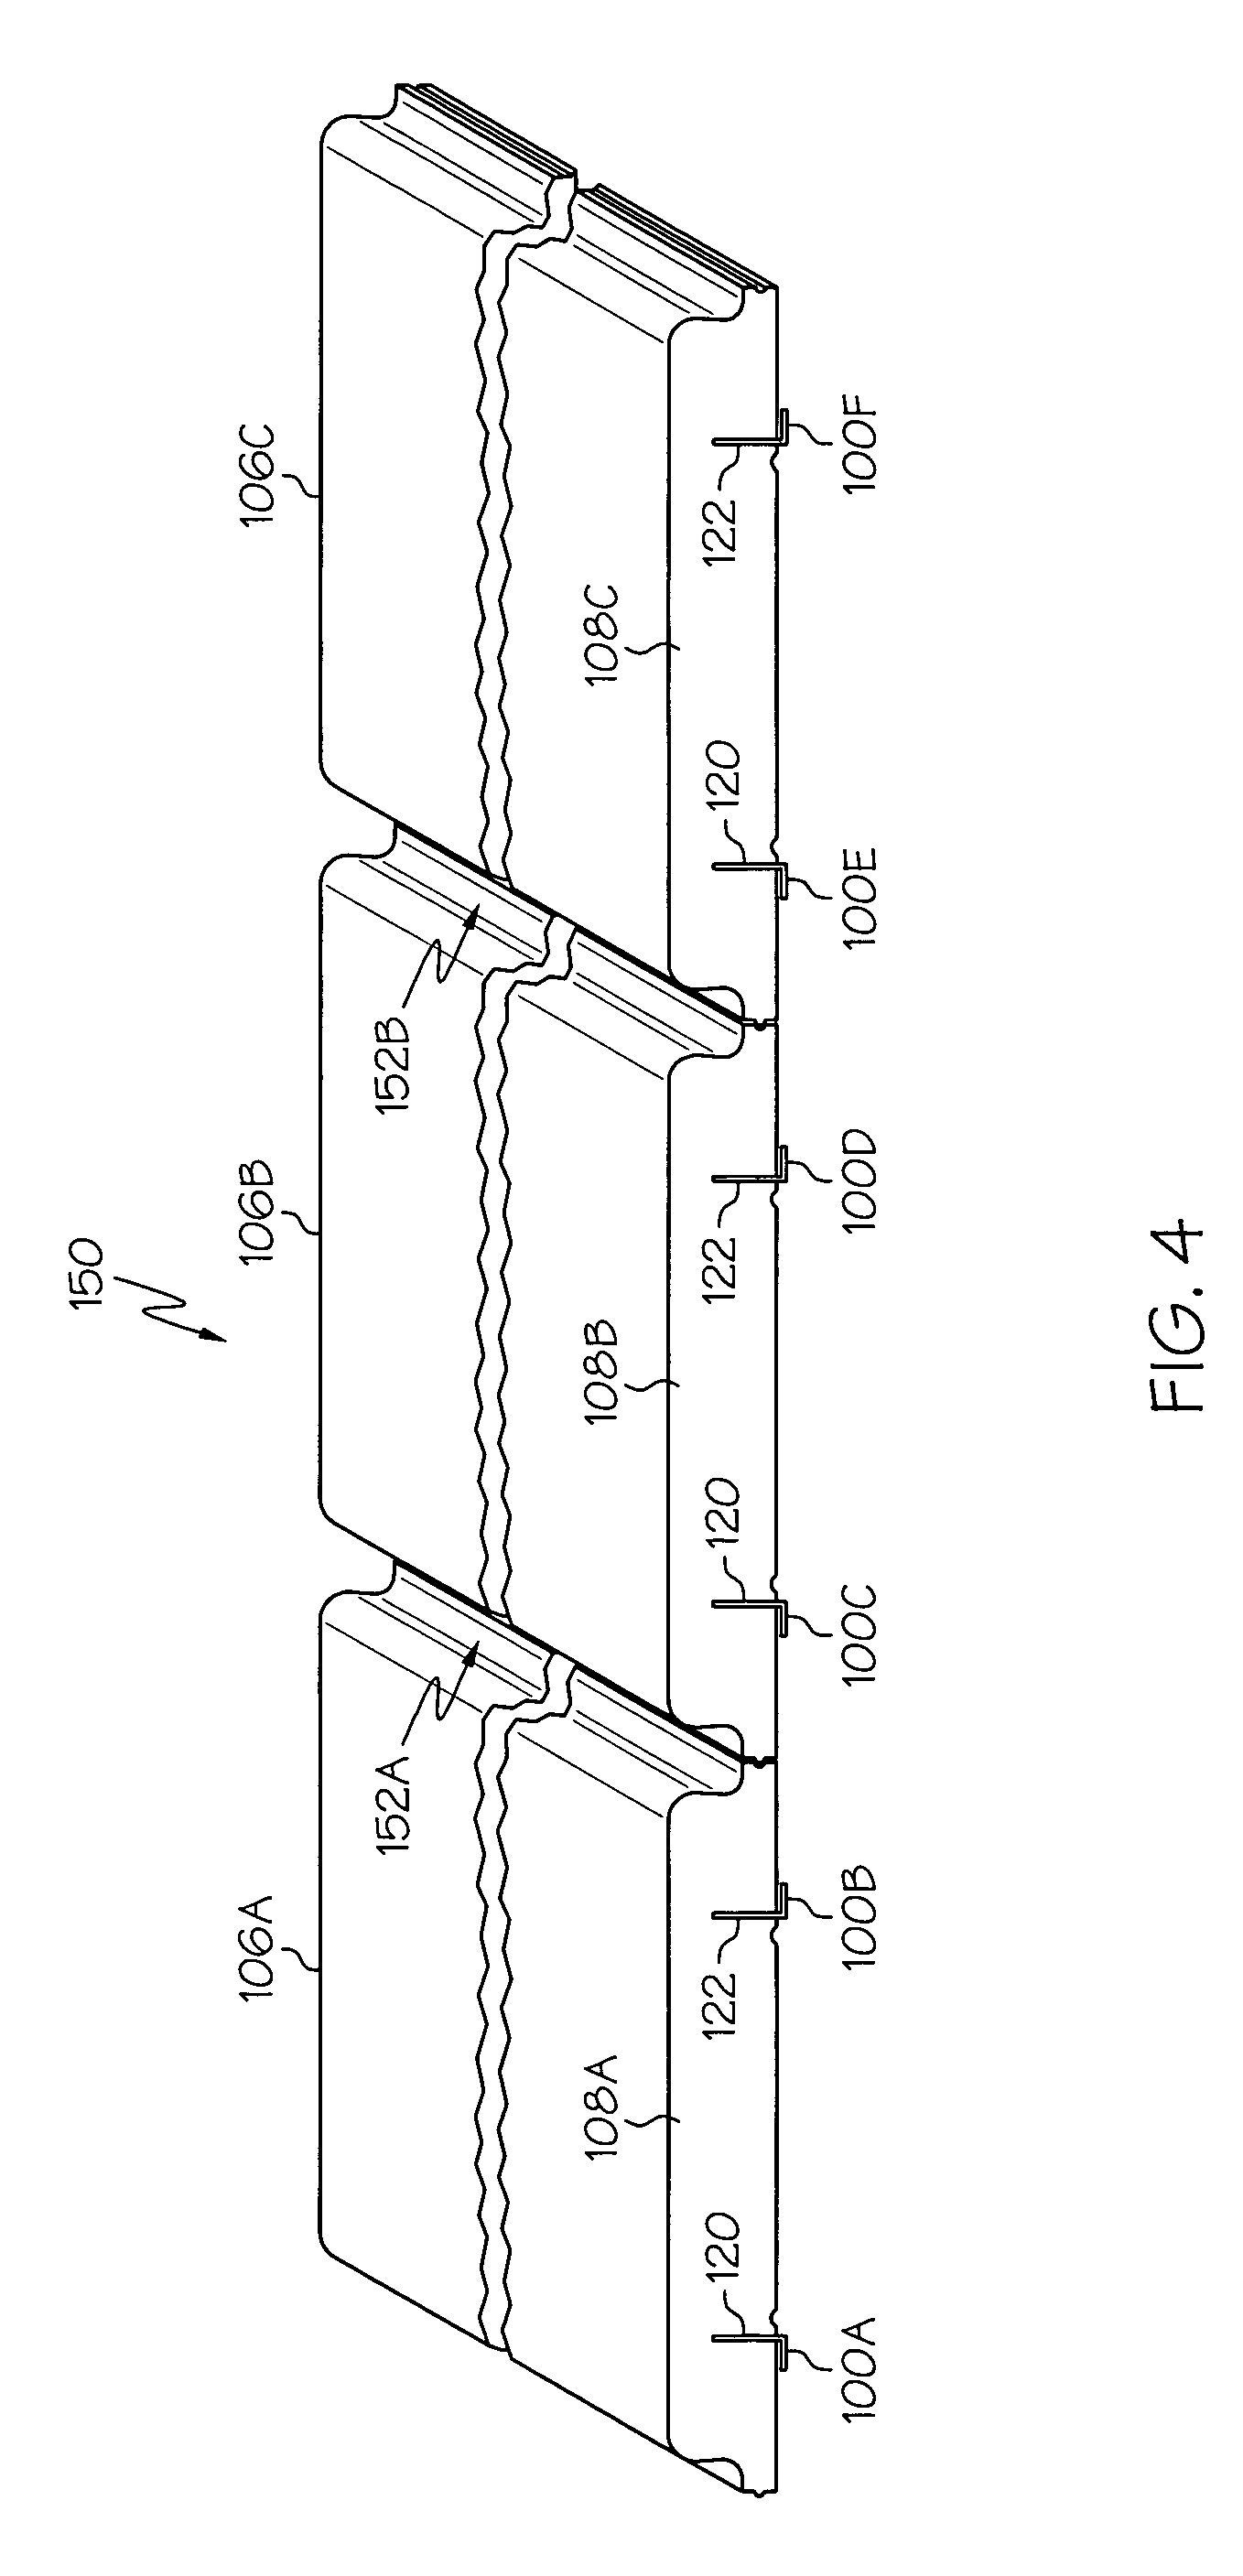 Method and apparatus for forming cast wall panels